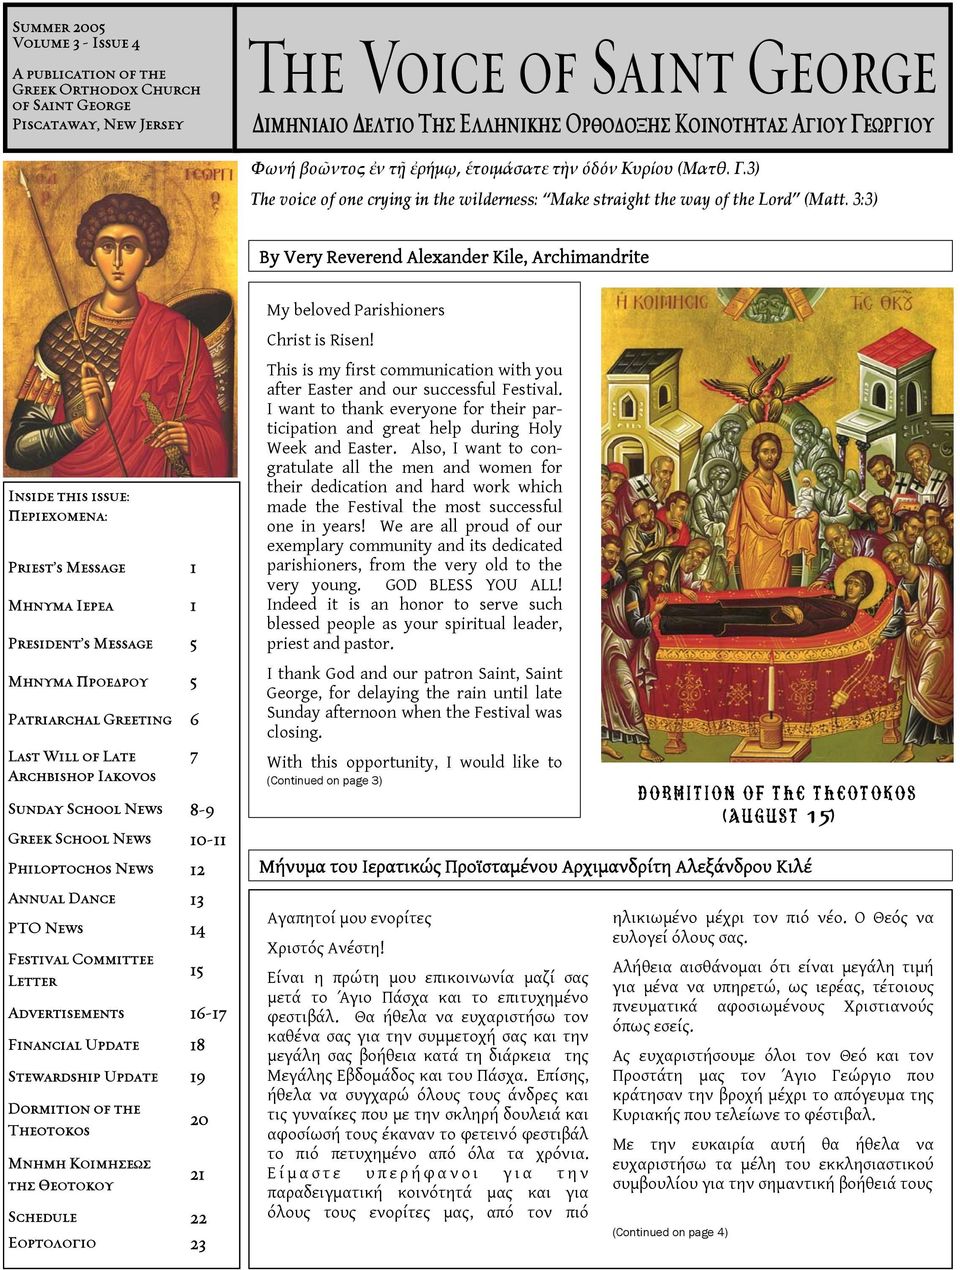 3:3) By Very Reverend Alexander Kile, Archimandrite Inside this issue: Periecomena: Priest s Message 1 Mhnuma Ierea 1 President s Message 5 Mhnuma Proedrou 5 Patriarchal Greeting 6 Last Will of Late